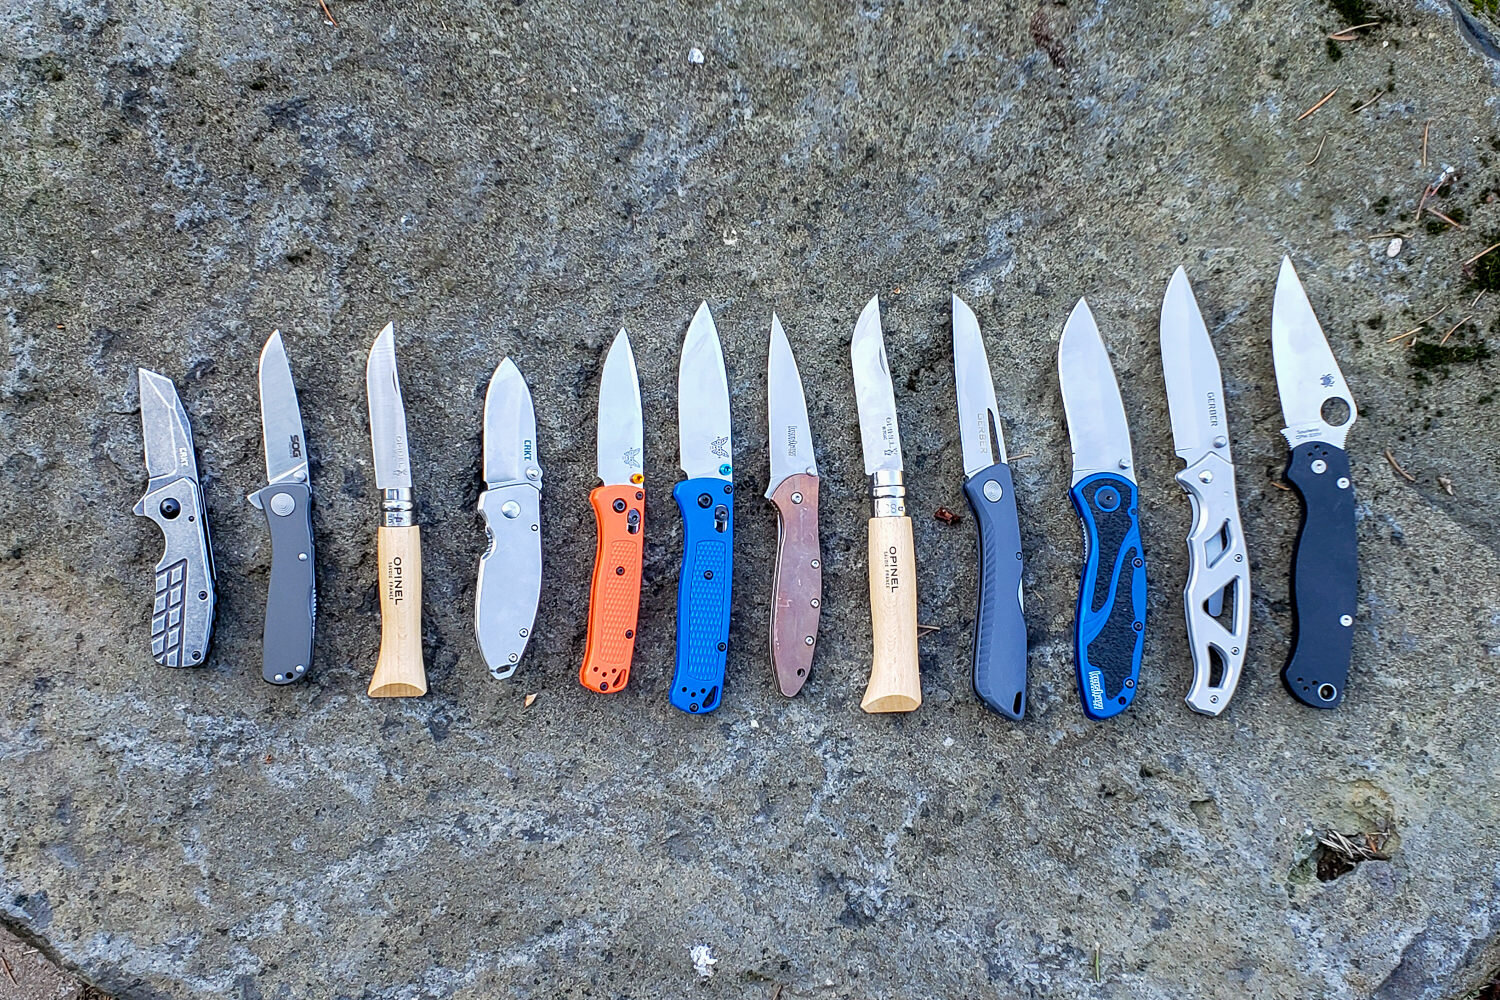 We own and use every knife we recommend.